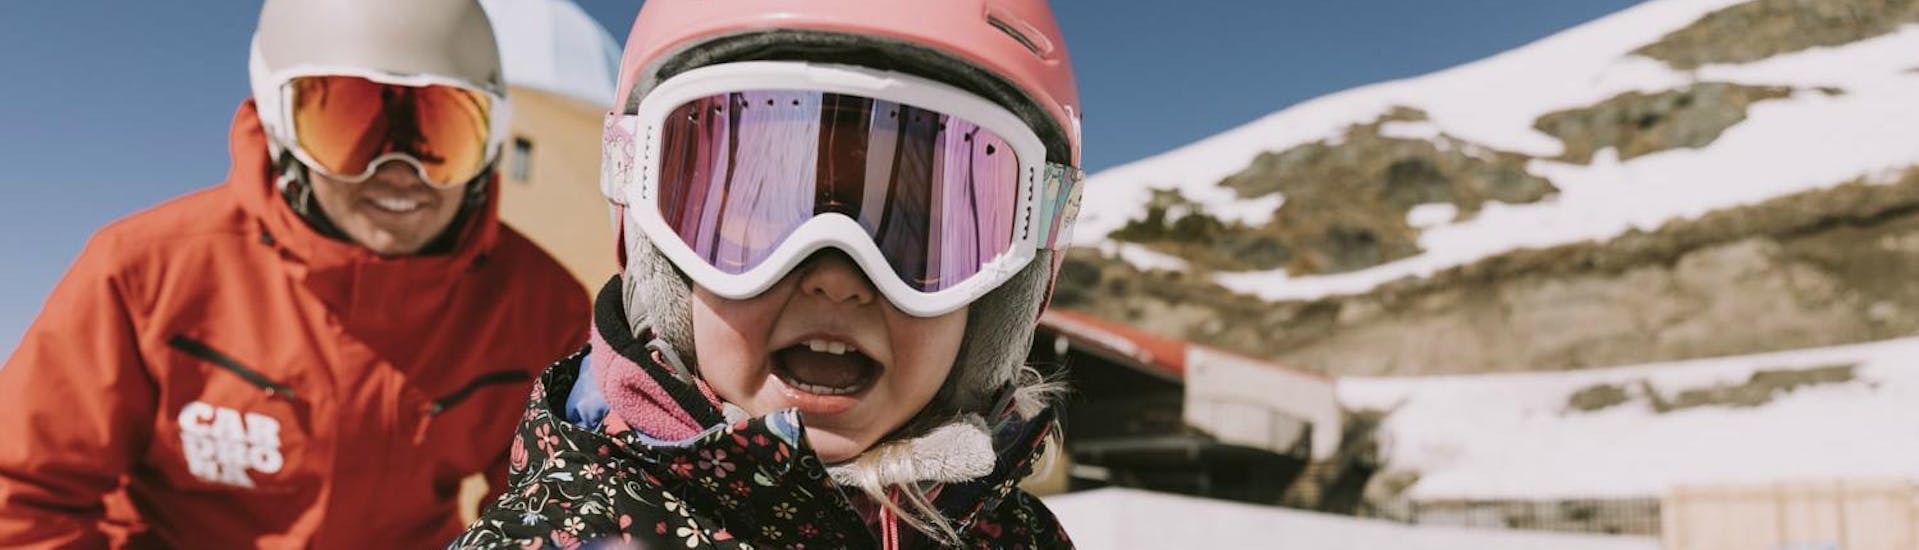 Kids Ski Lessons (3½ - 4 years) - First Timer.